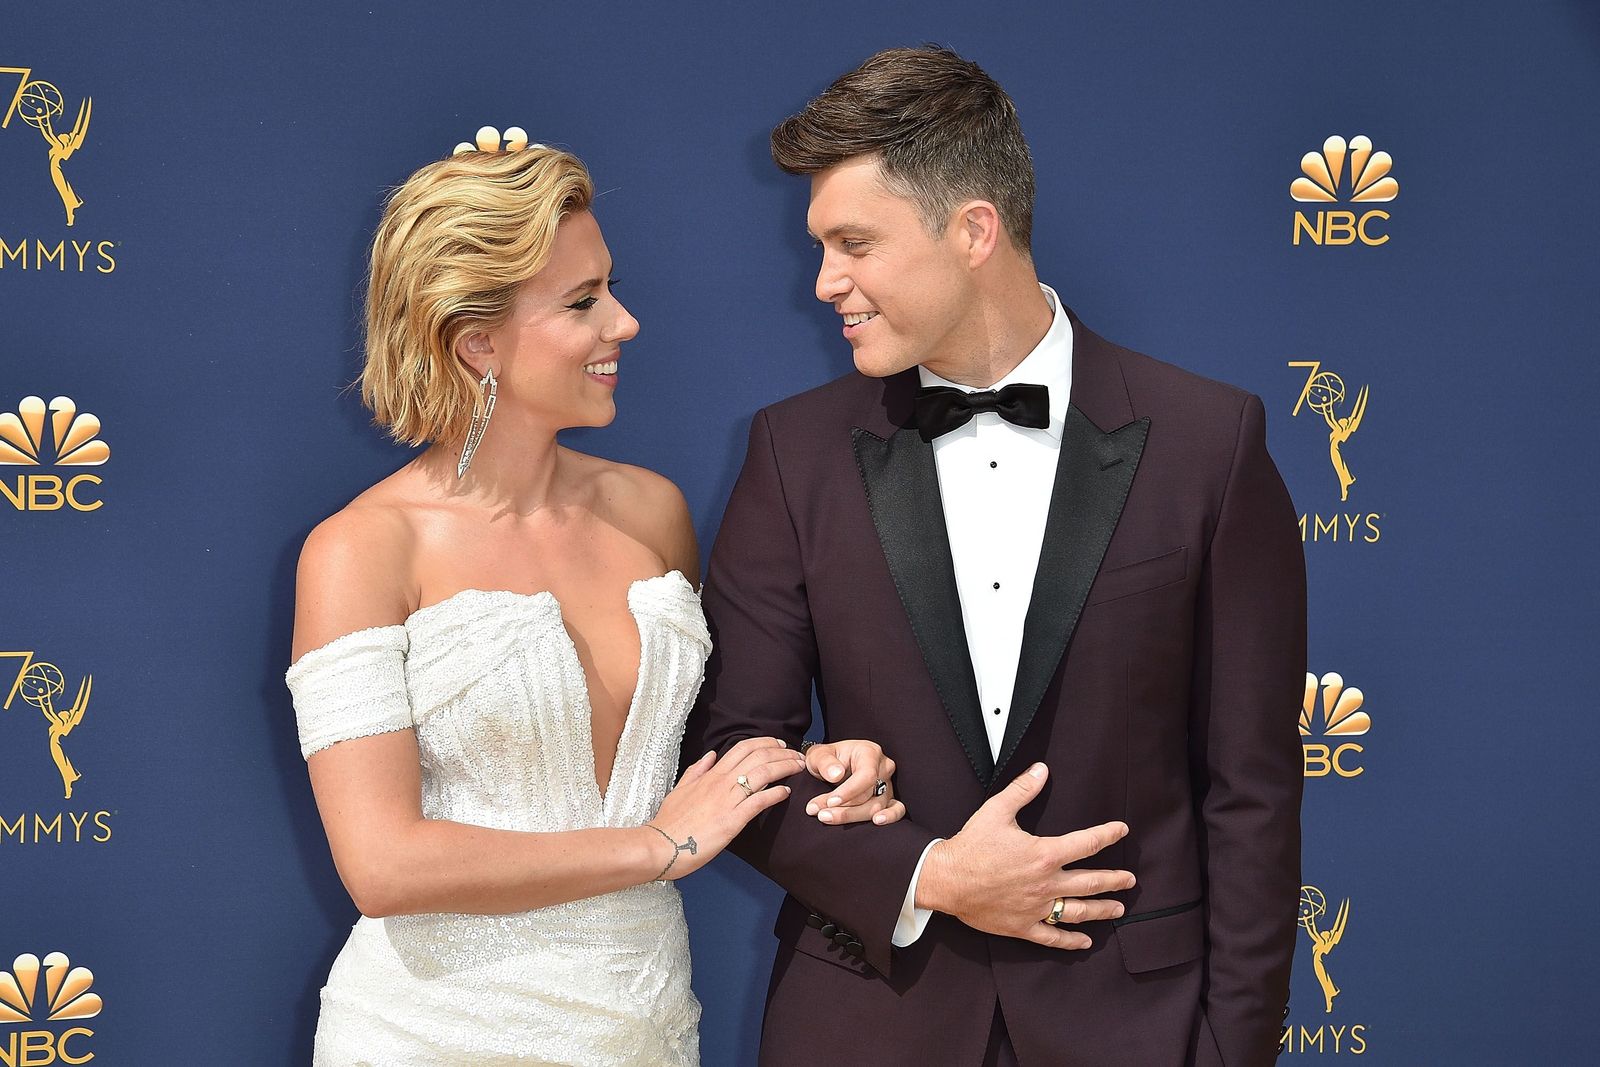 Black Widow actress Scarlett Johansson and husband Colin Jost welcome first child together